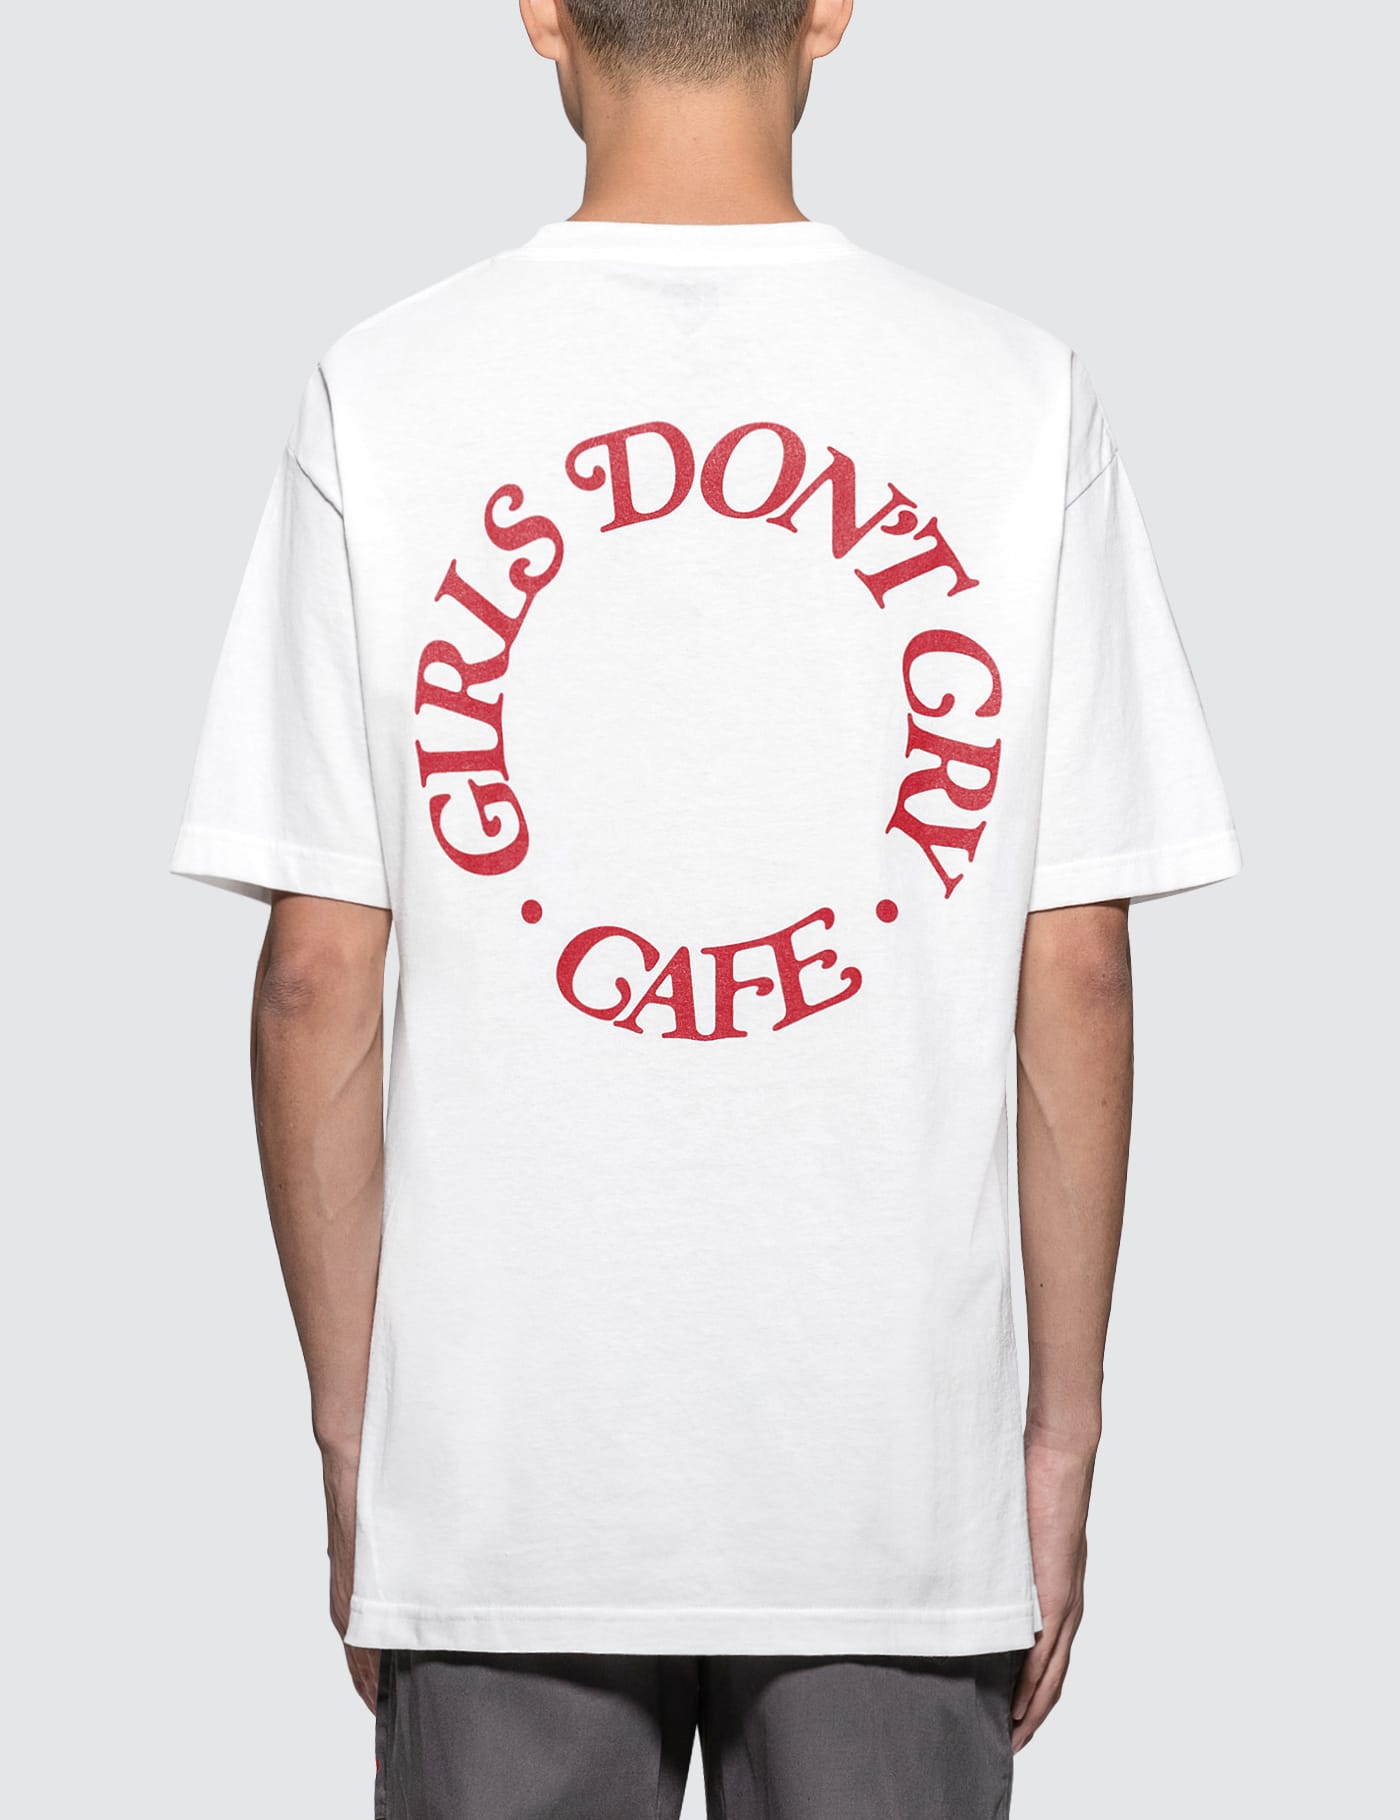 Girls Don't Cry - GDC Cafe S/S T-Shirt | HBX - Globally Curated